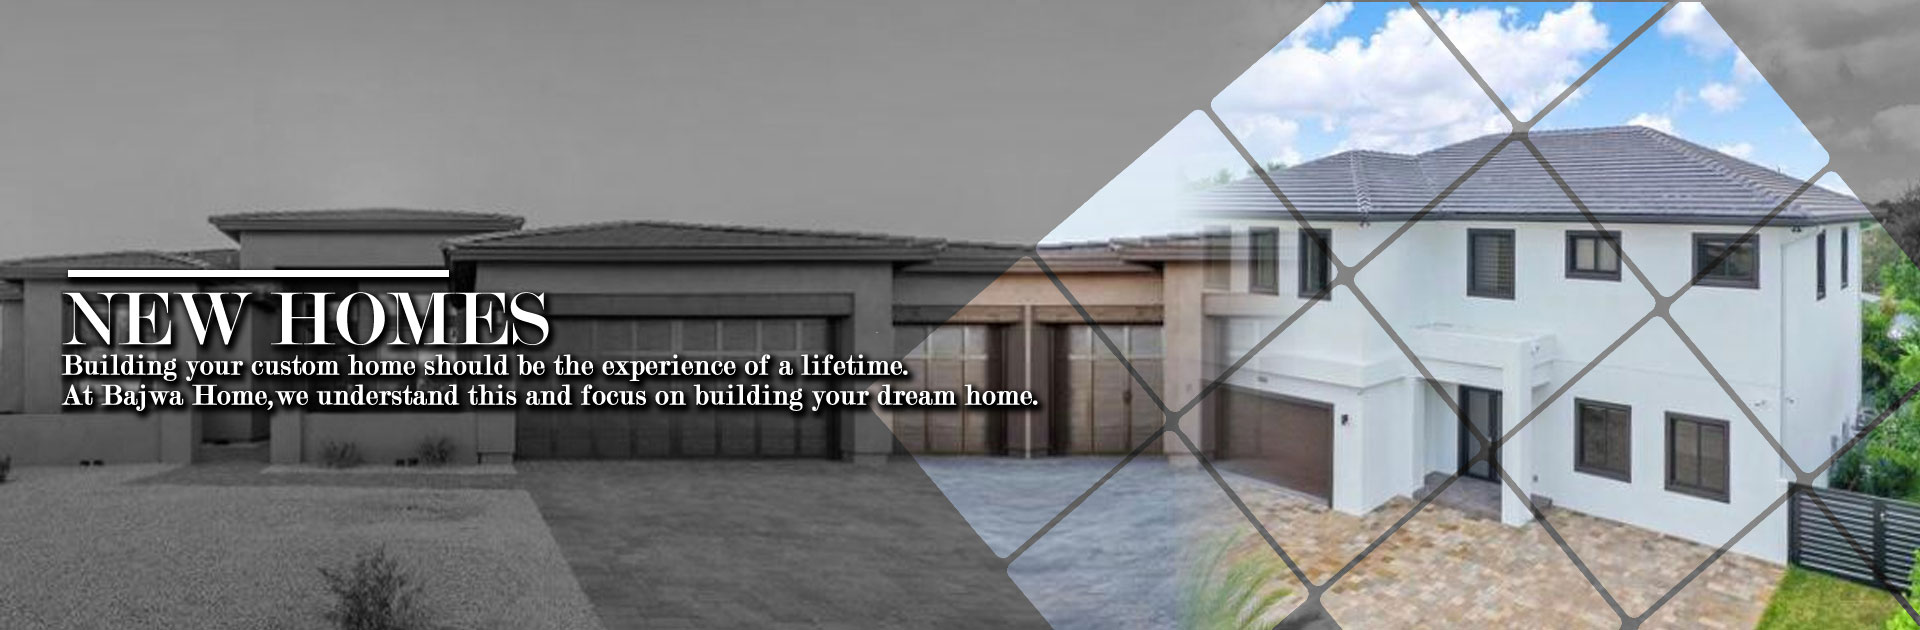 Bajwa Homes is a Perth-based builder that delivers high-quality